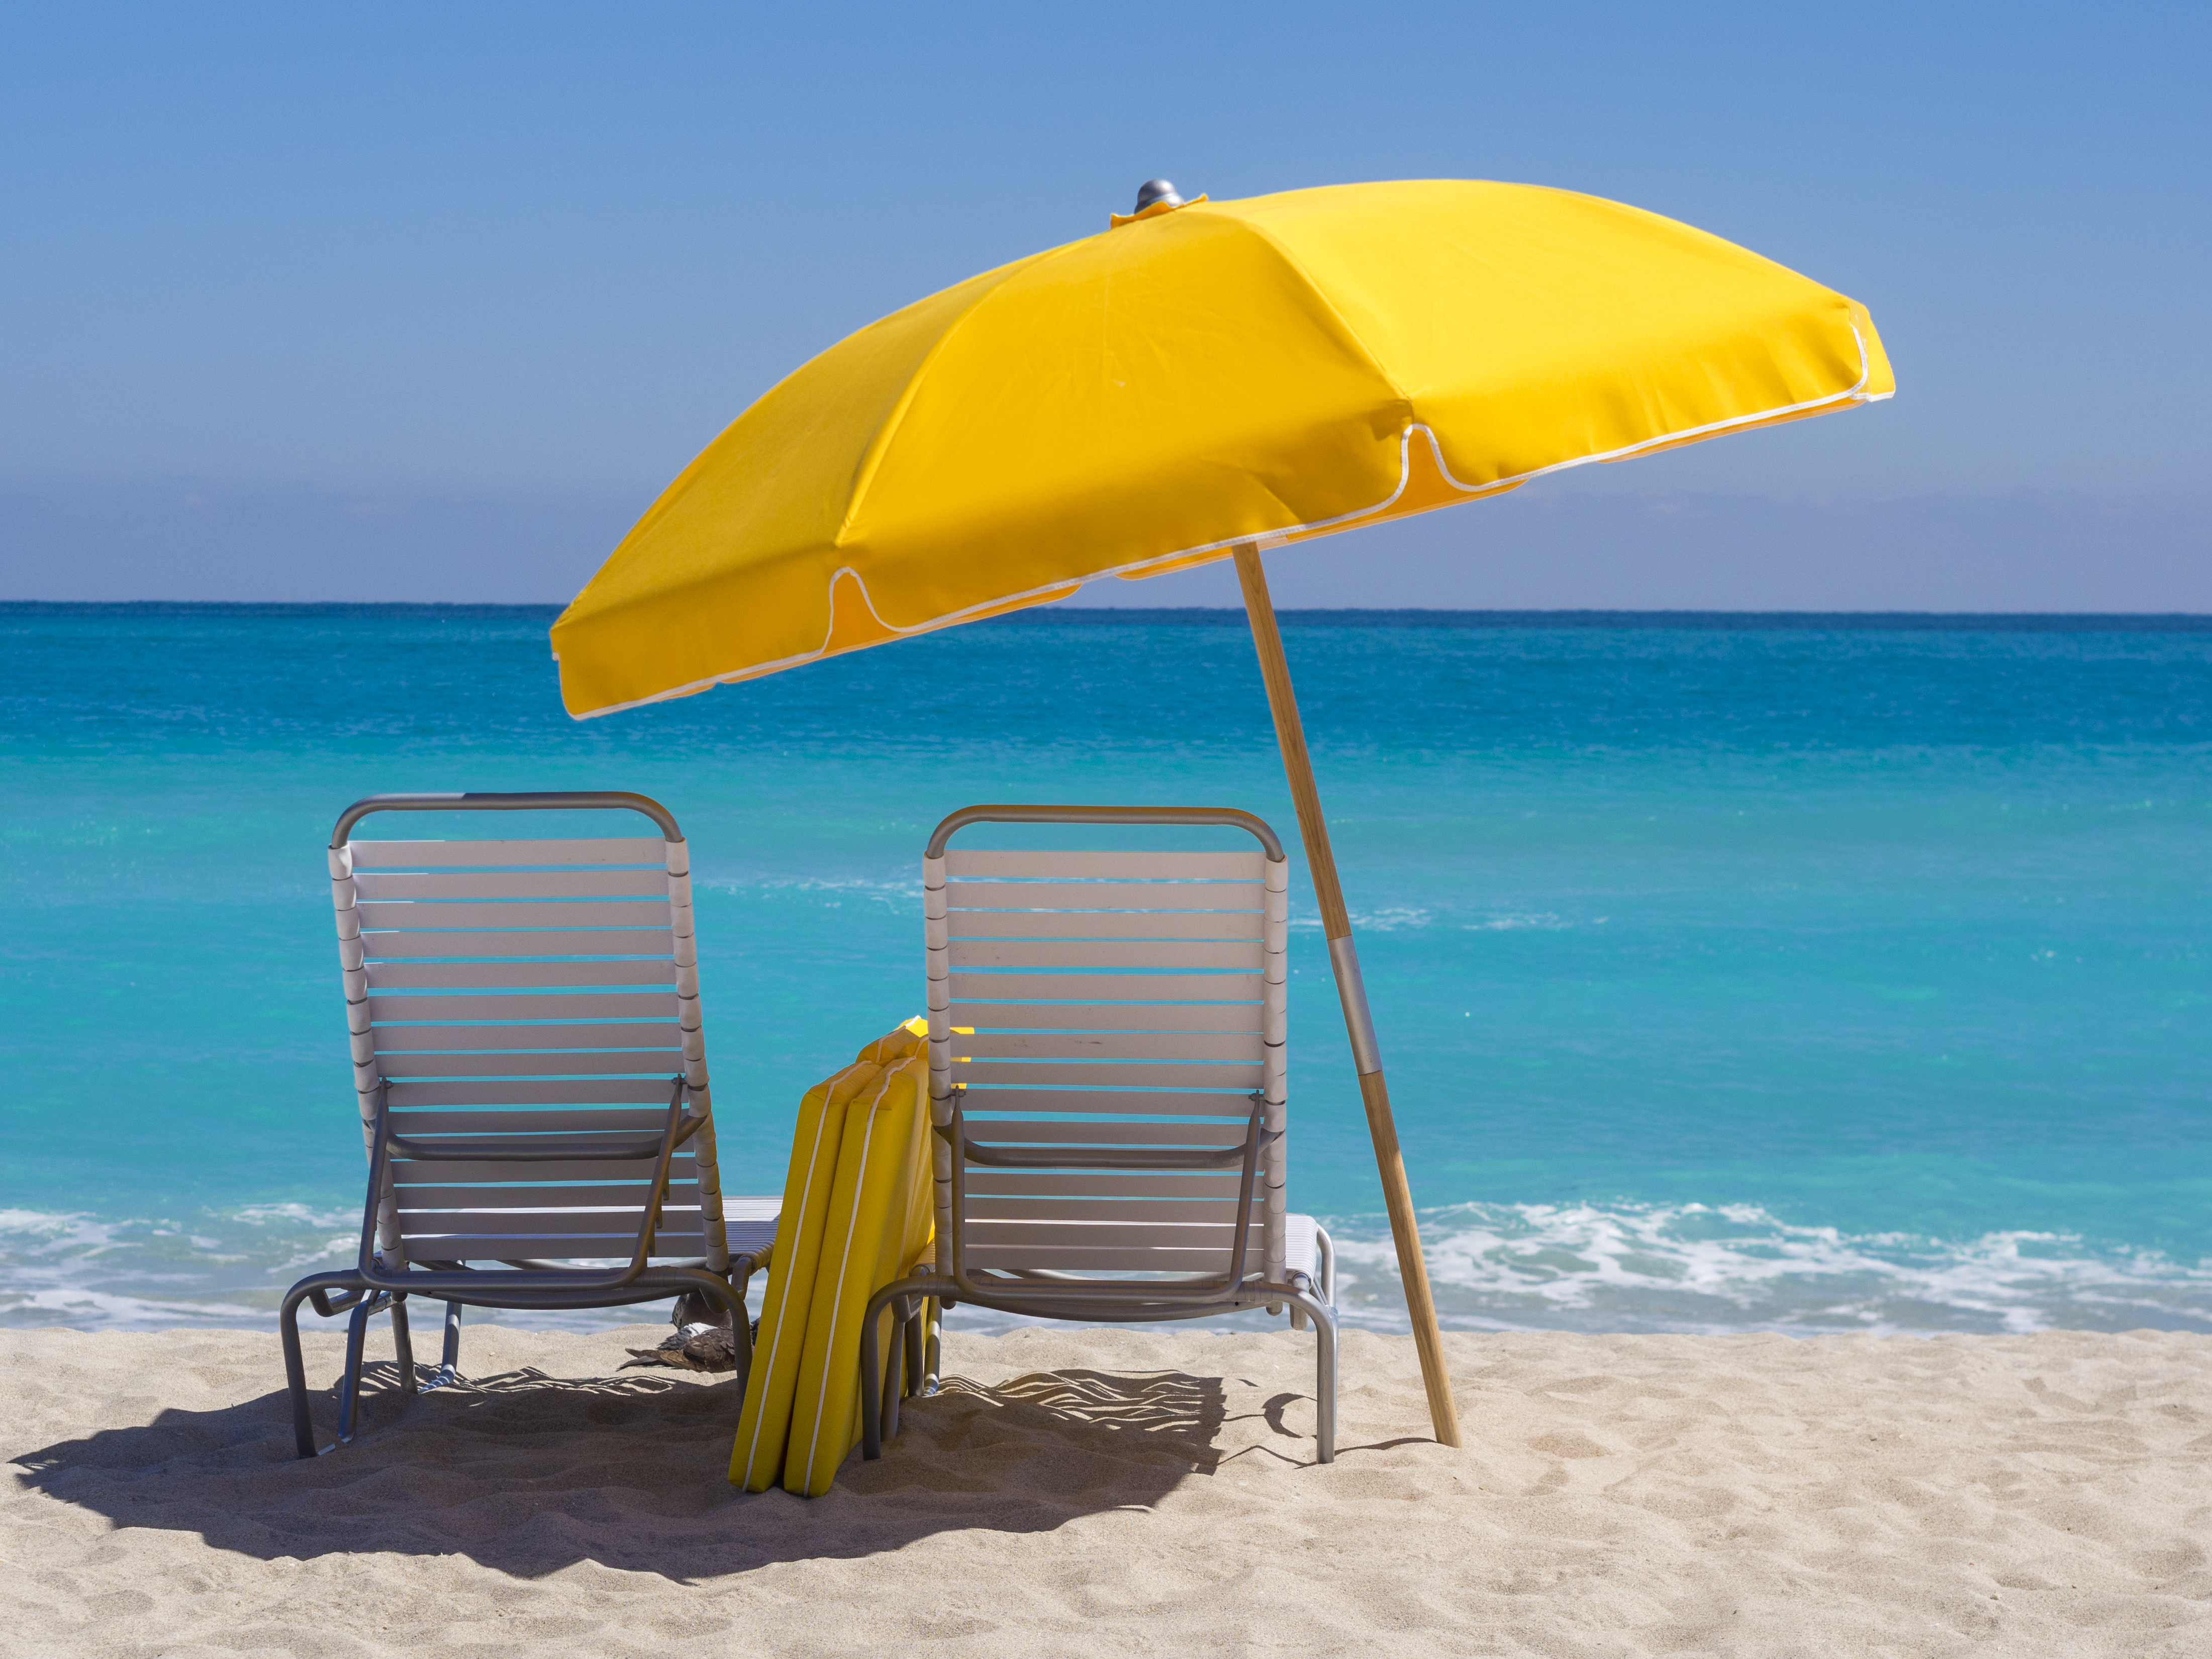 Summer Holiday In Bulgaria: Visitors Can Now Prepay Online For Umbrellas And Sunbeds On The Beach